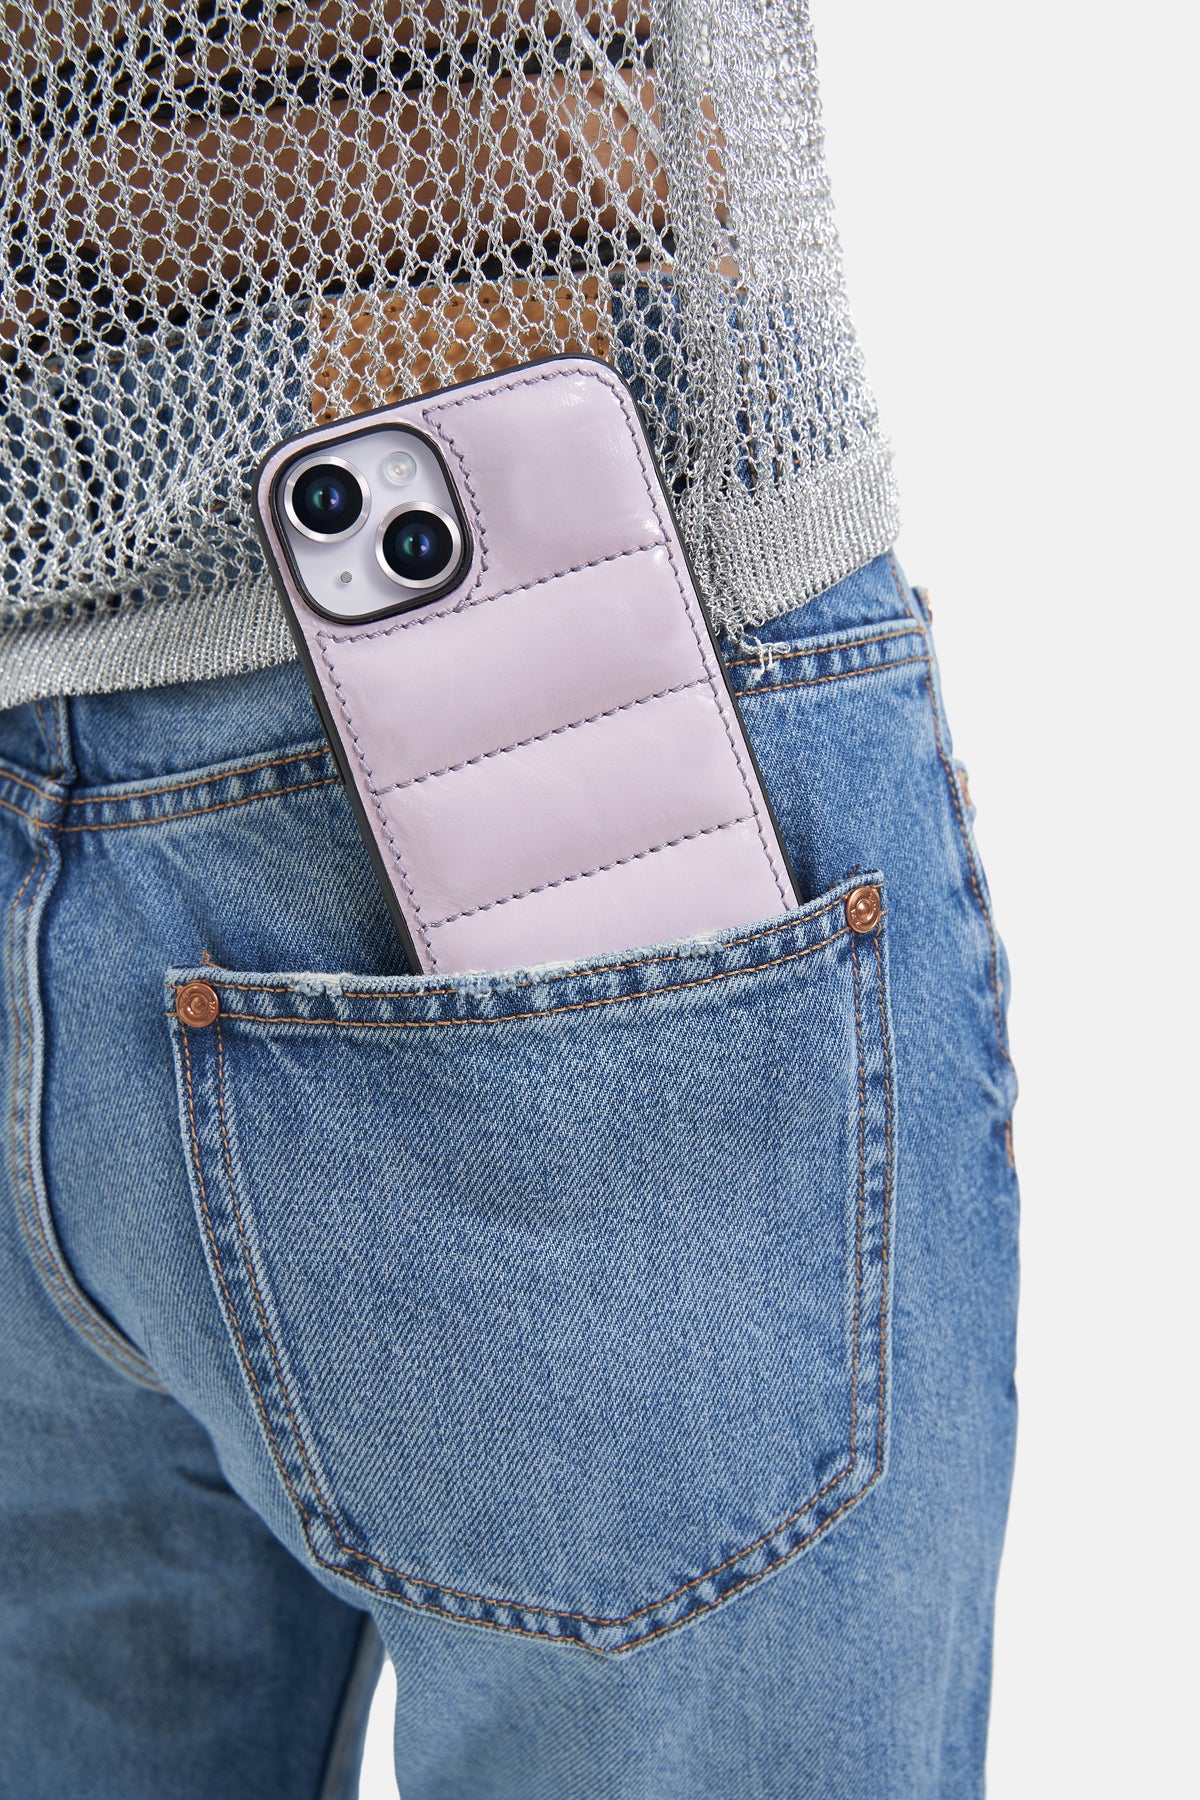 IPhone Puffer Case - Quilted - Patent Lavender Grey